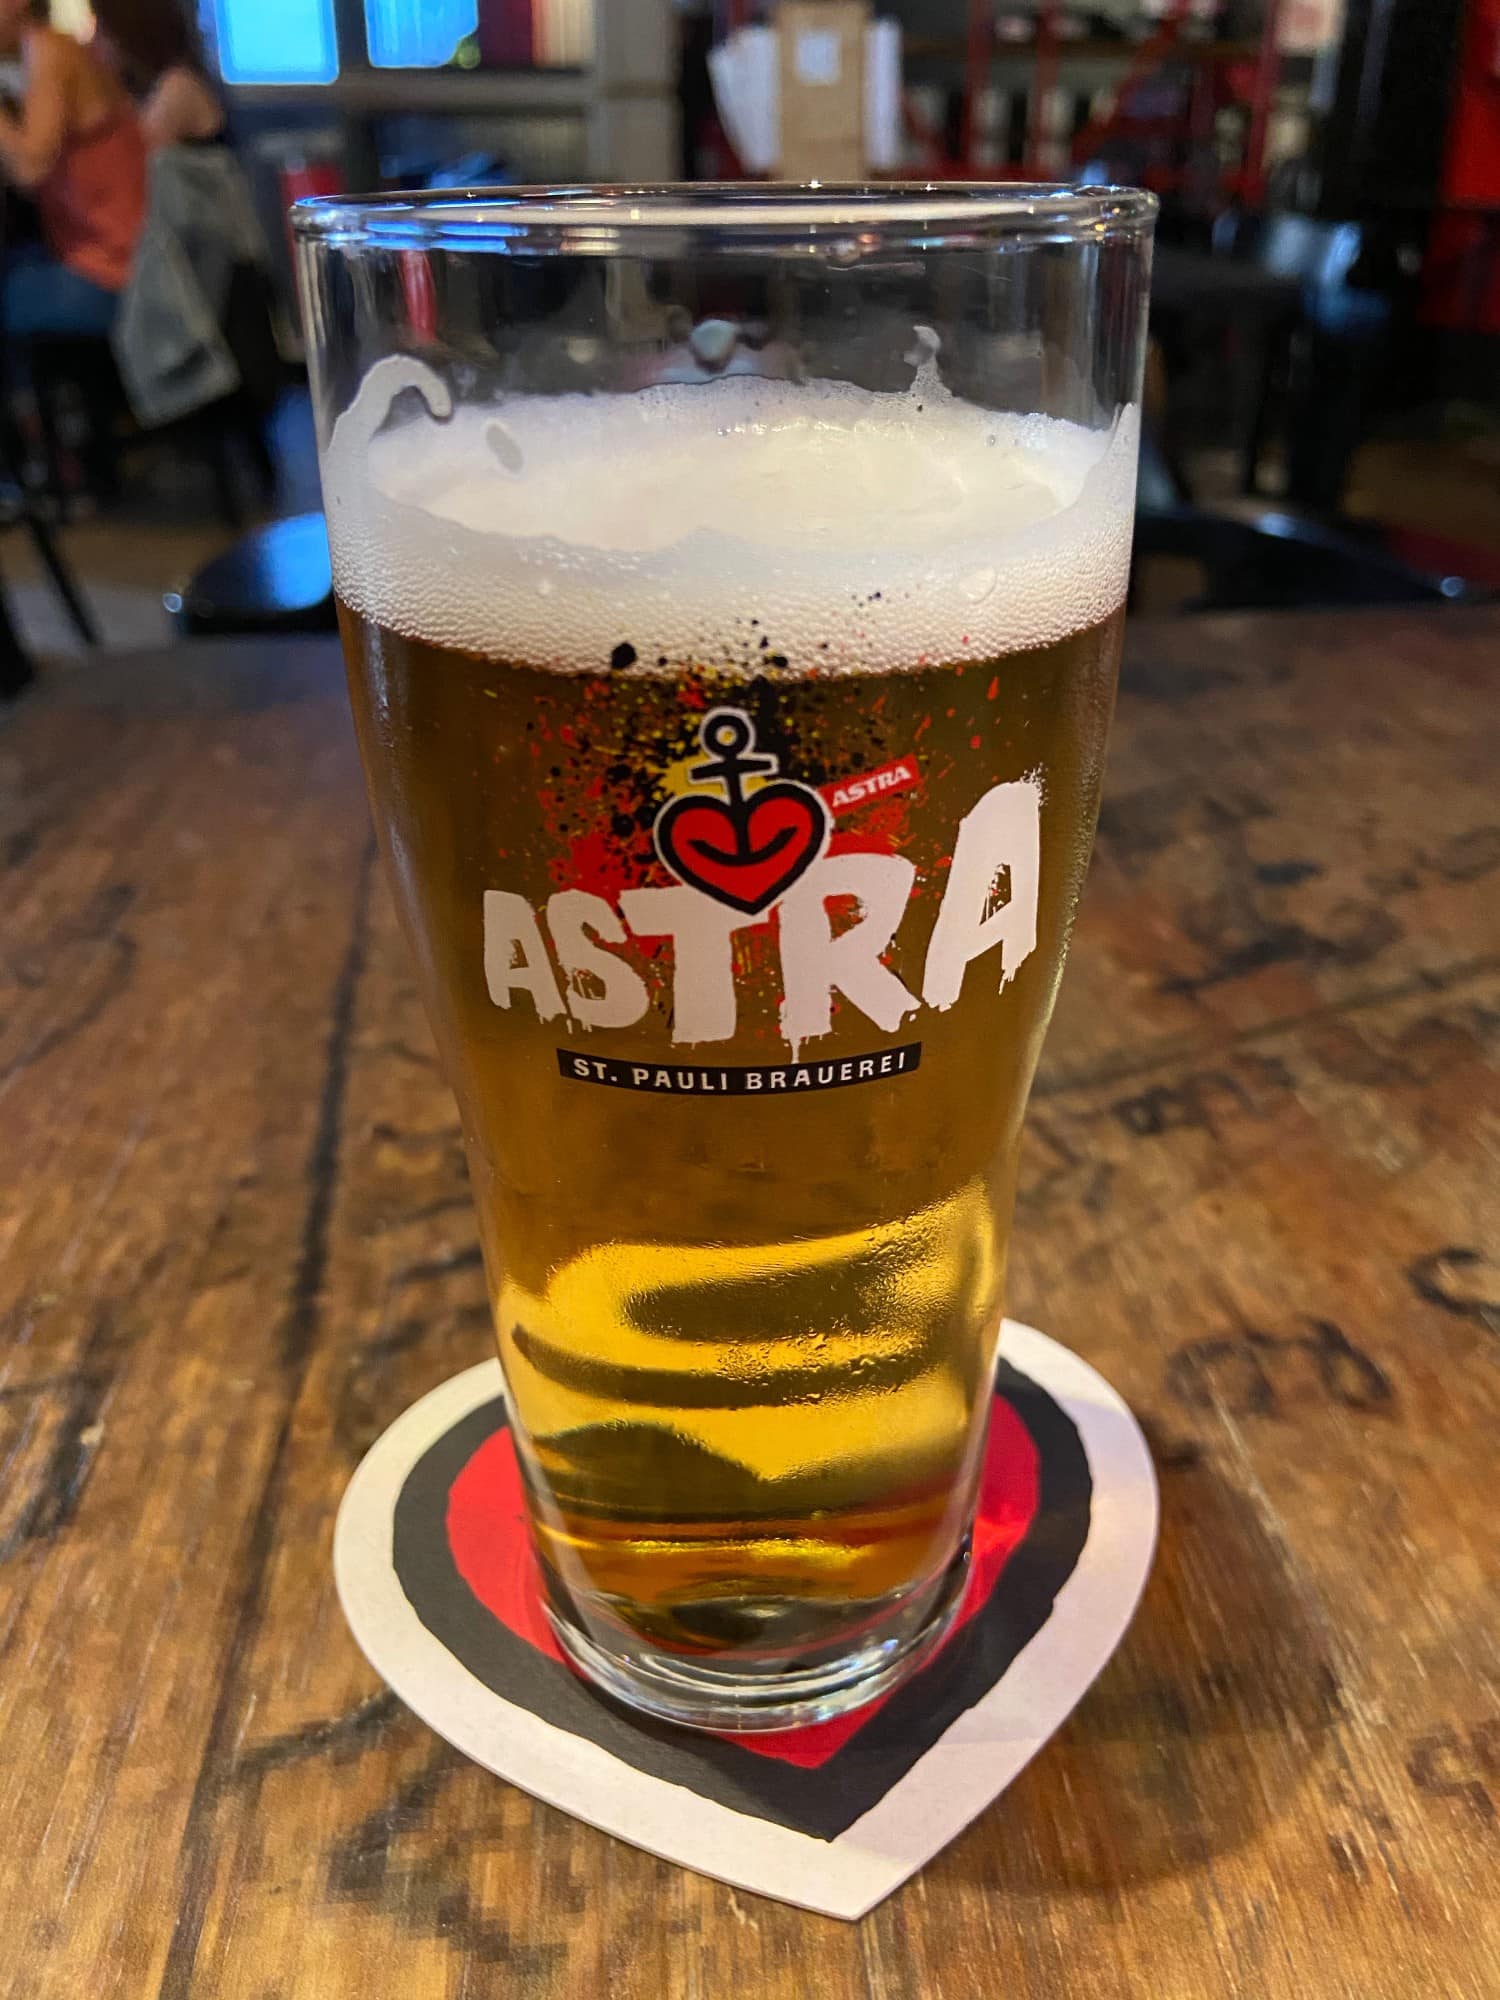 Astra brewery